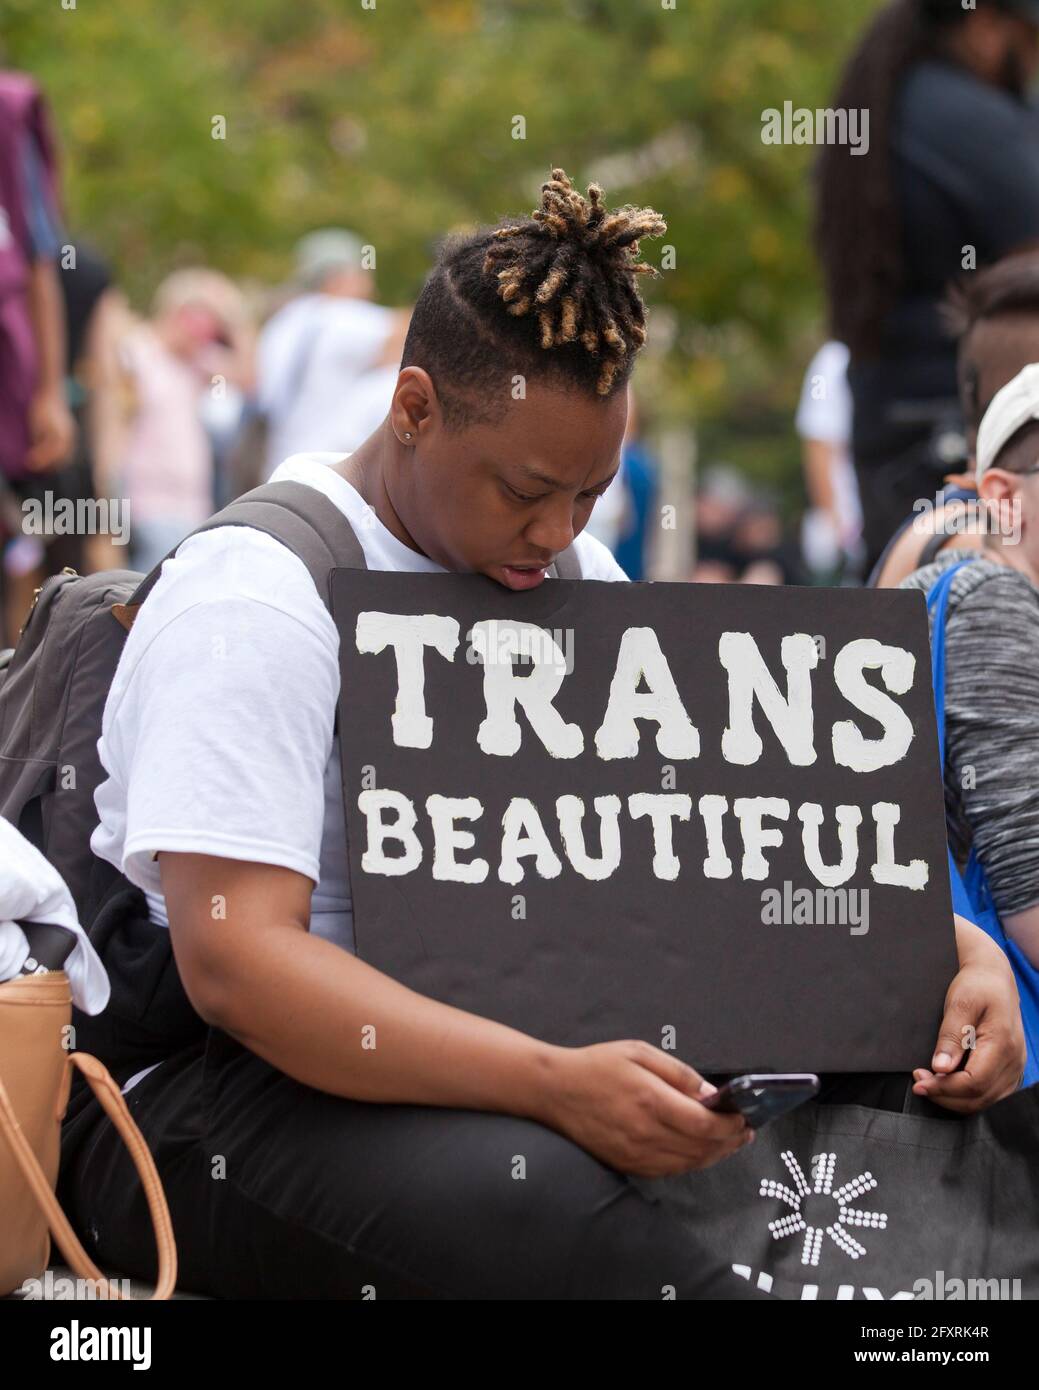 September 28, 2019 - Washington, DC USA: Transgender rights activists and family gather to raise awareness during The National Trans Visibility March Stock Photo